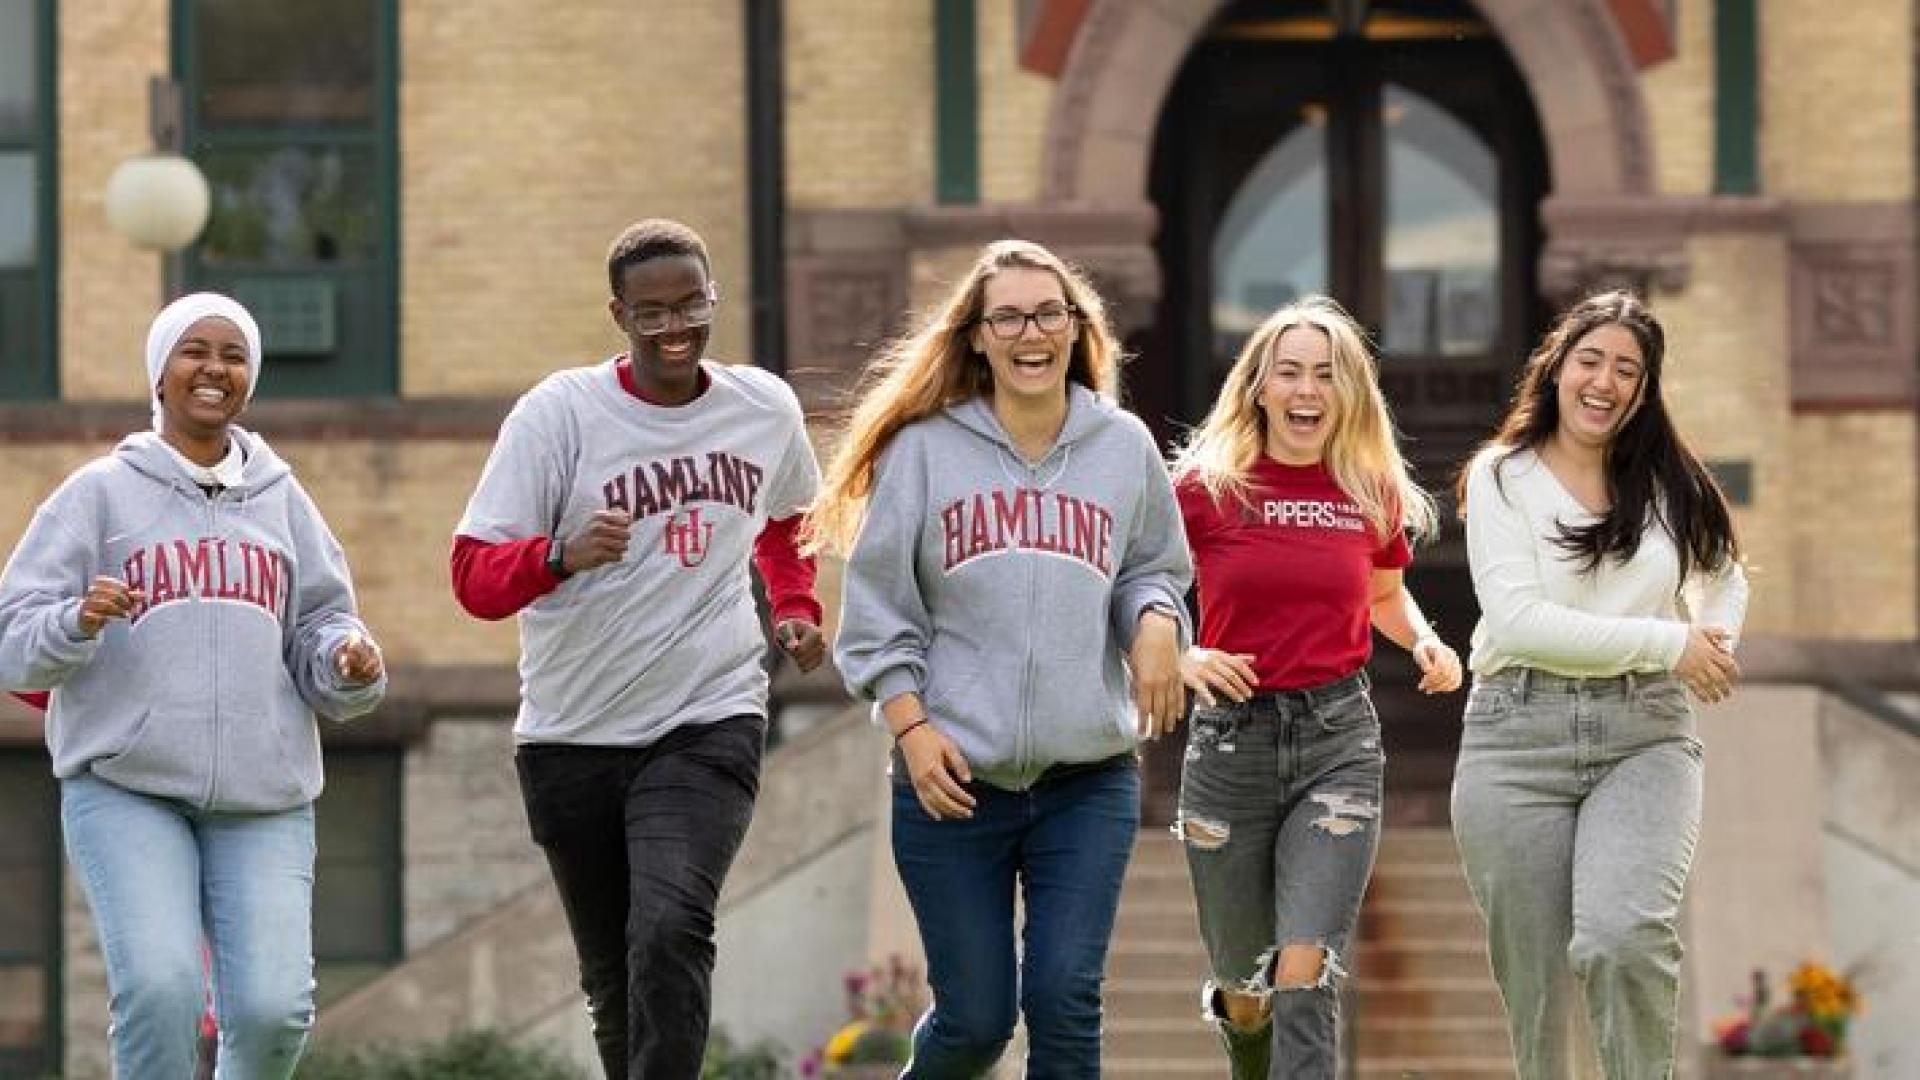 Hamline Student Hailey Belflowe and other students smiling to the picture